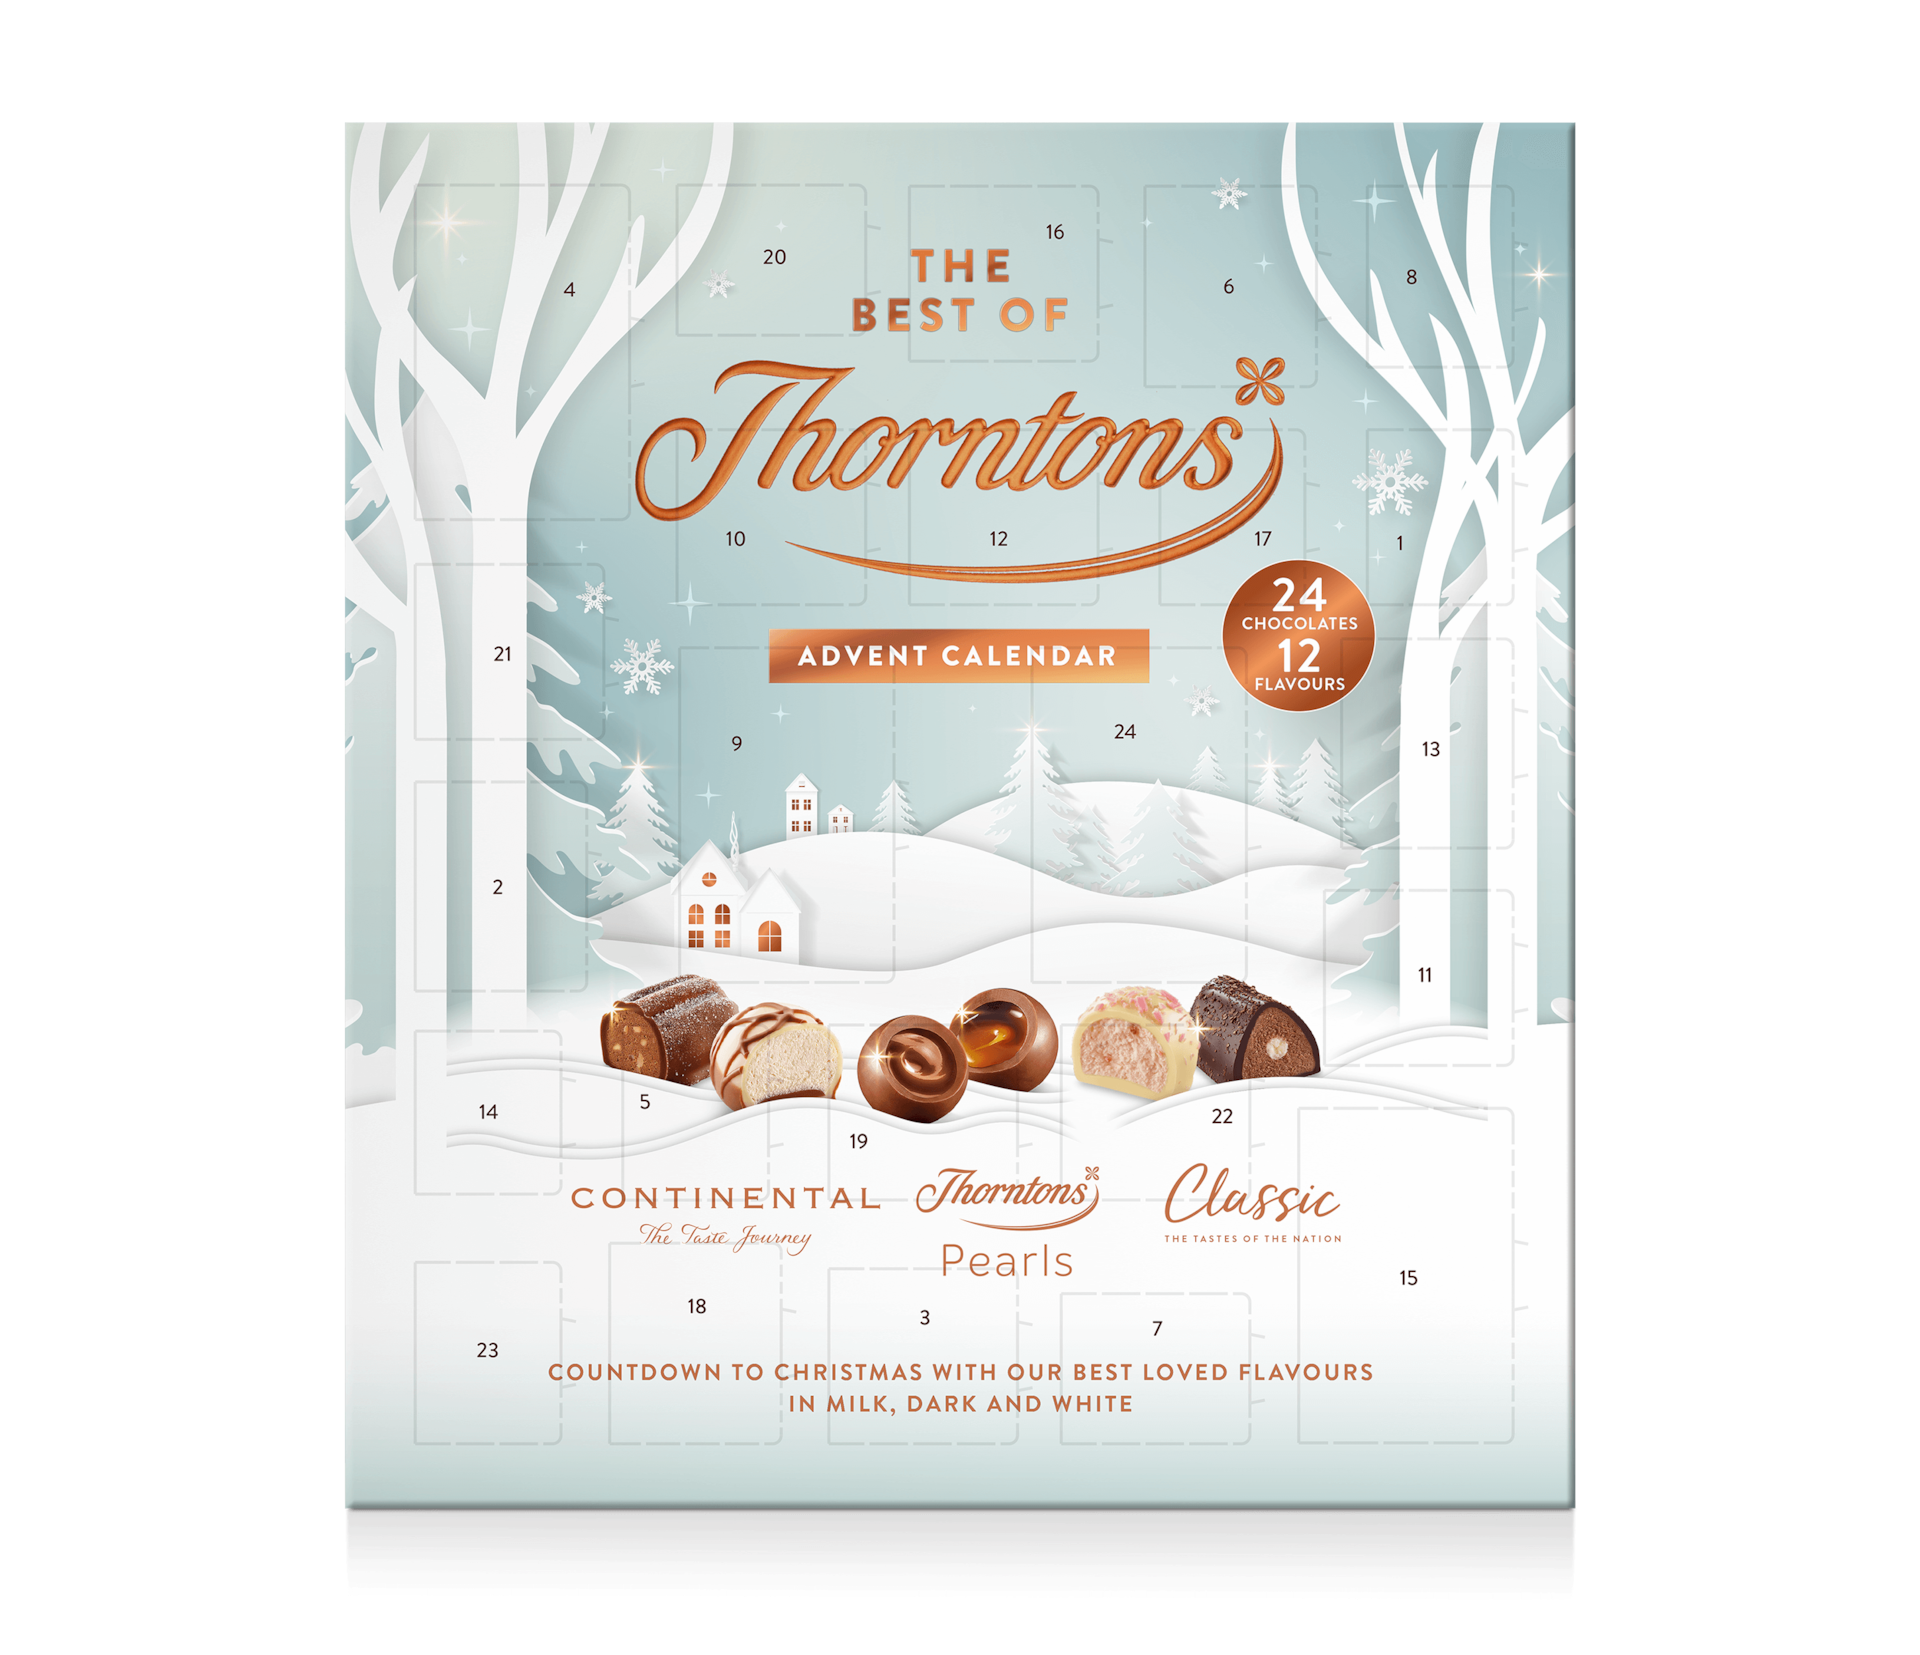 https://www.thorntons.com/medias/sys_master/images/h71/h34/10489741180958/77245686_main/77245686-main.png?resize=xs-s-xs